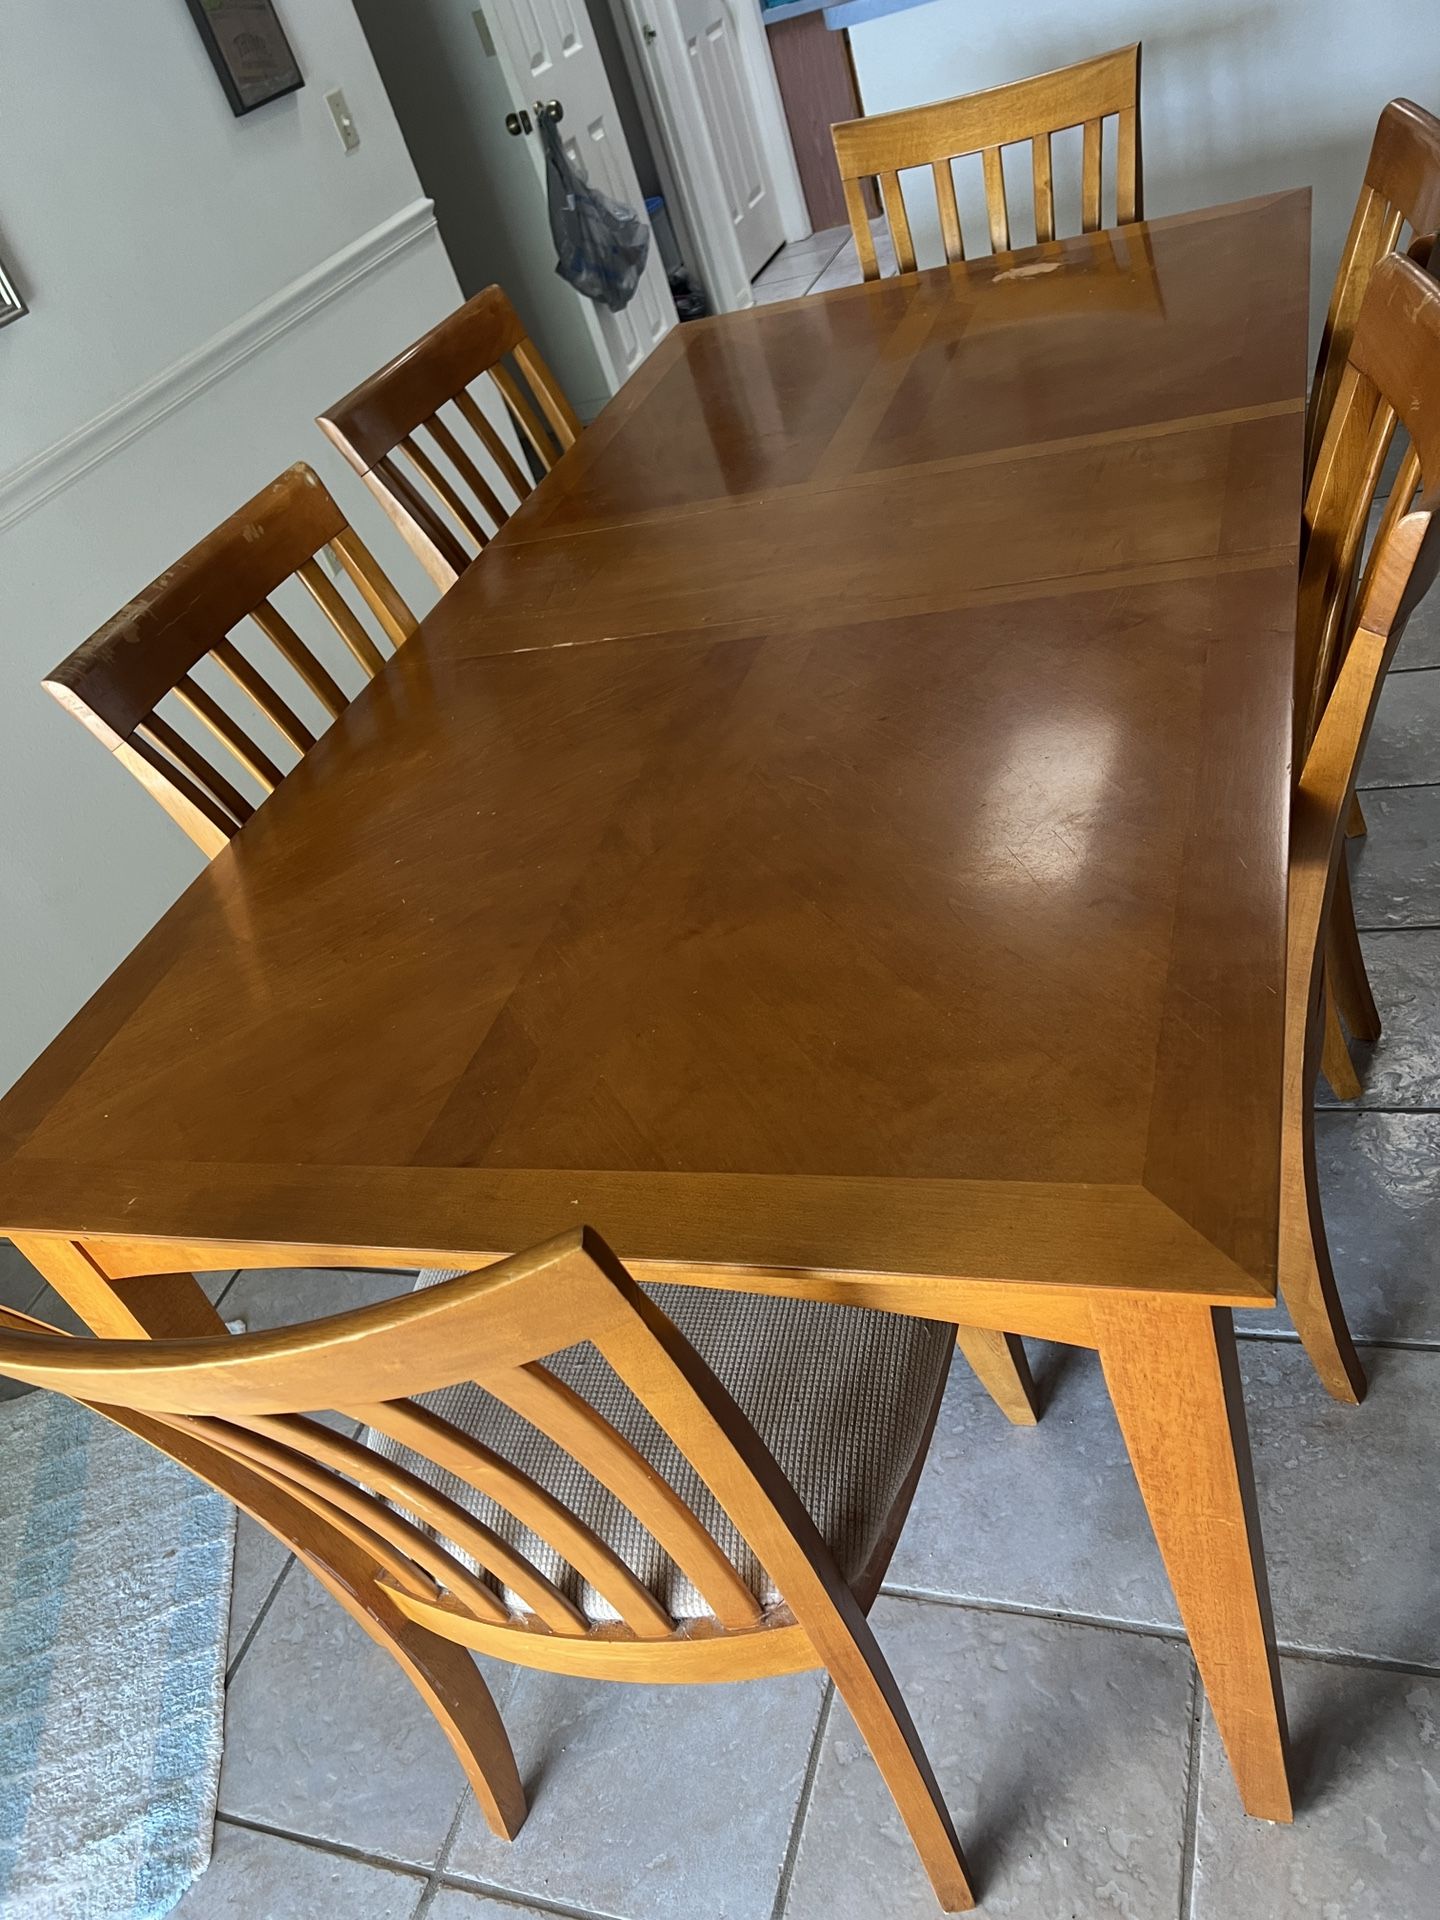 Dining Room Table And 6 Chairs Made Of Wood